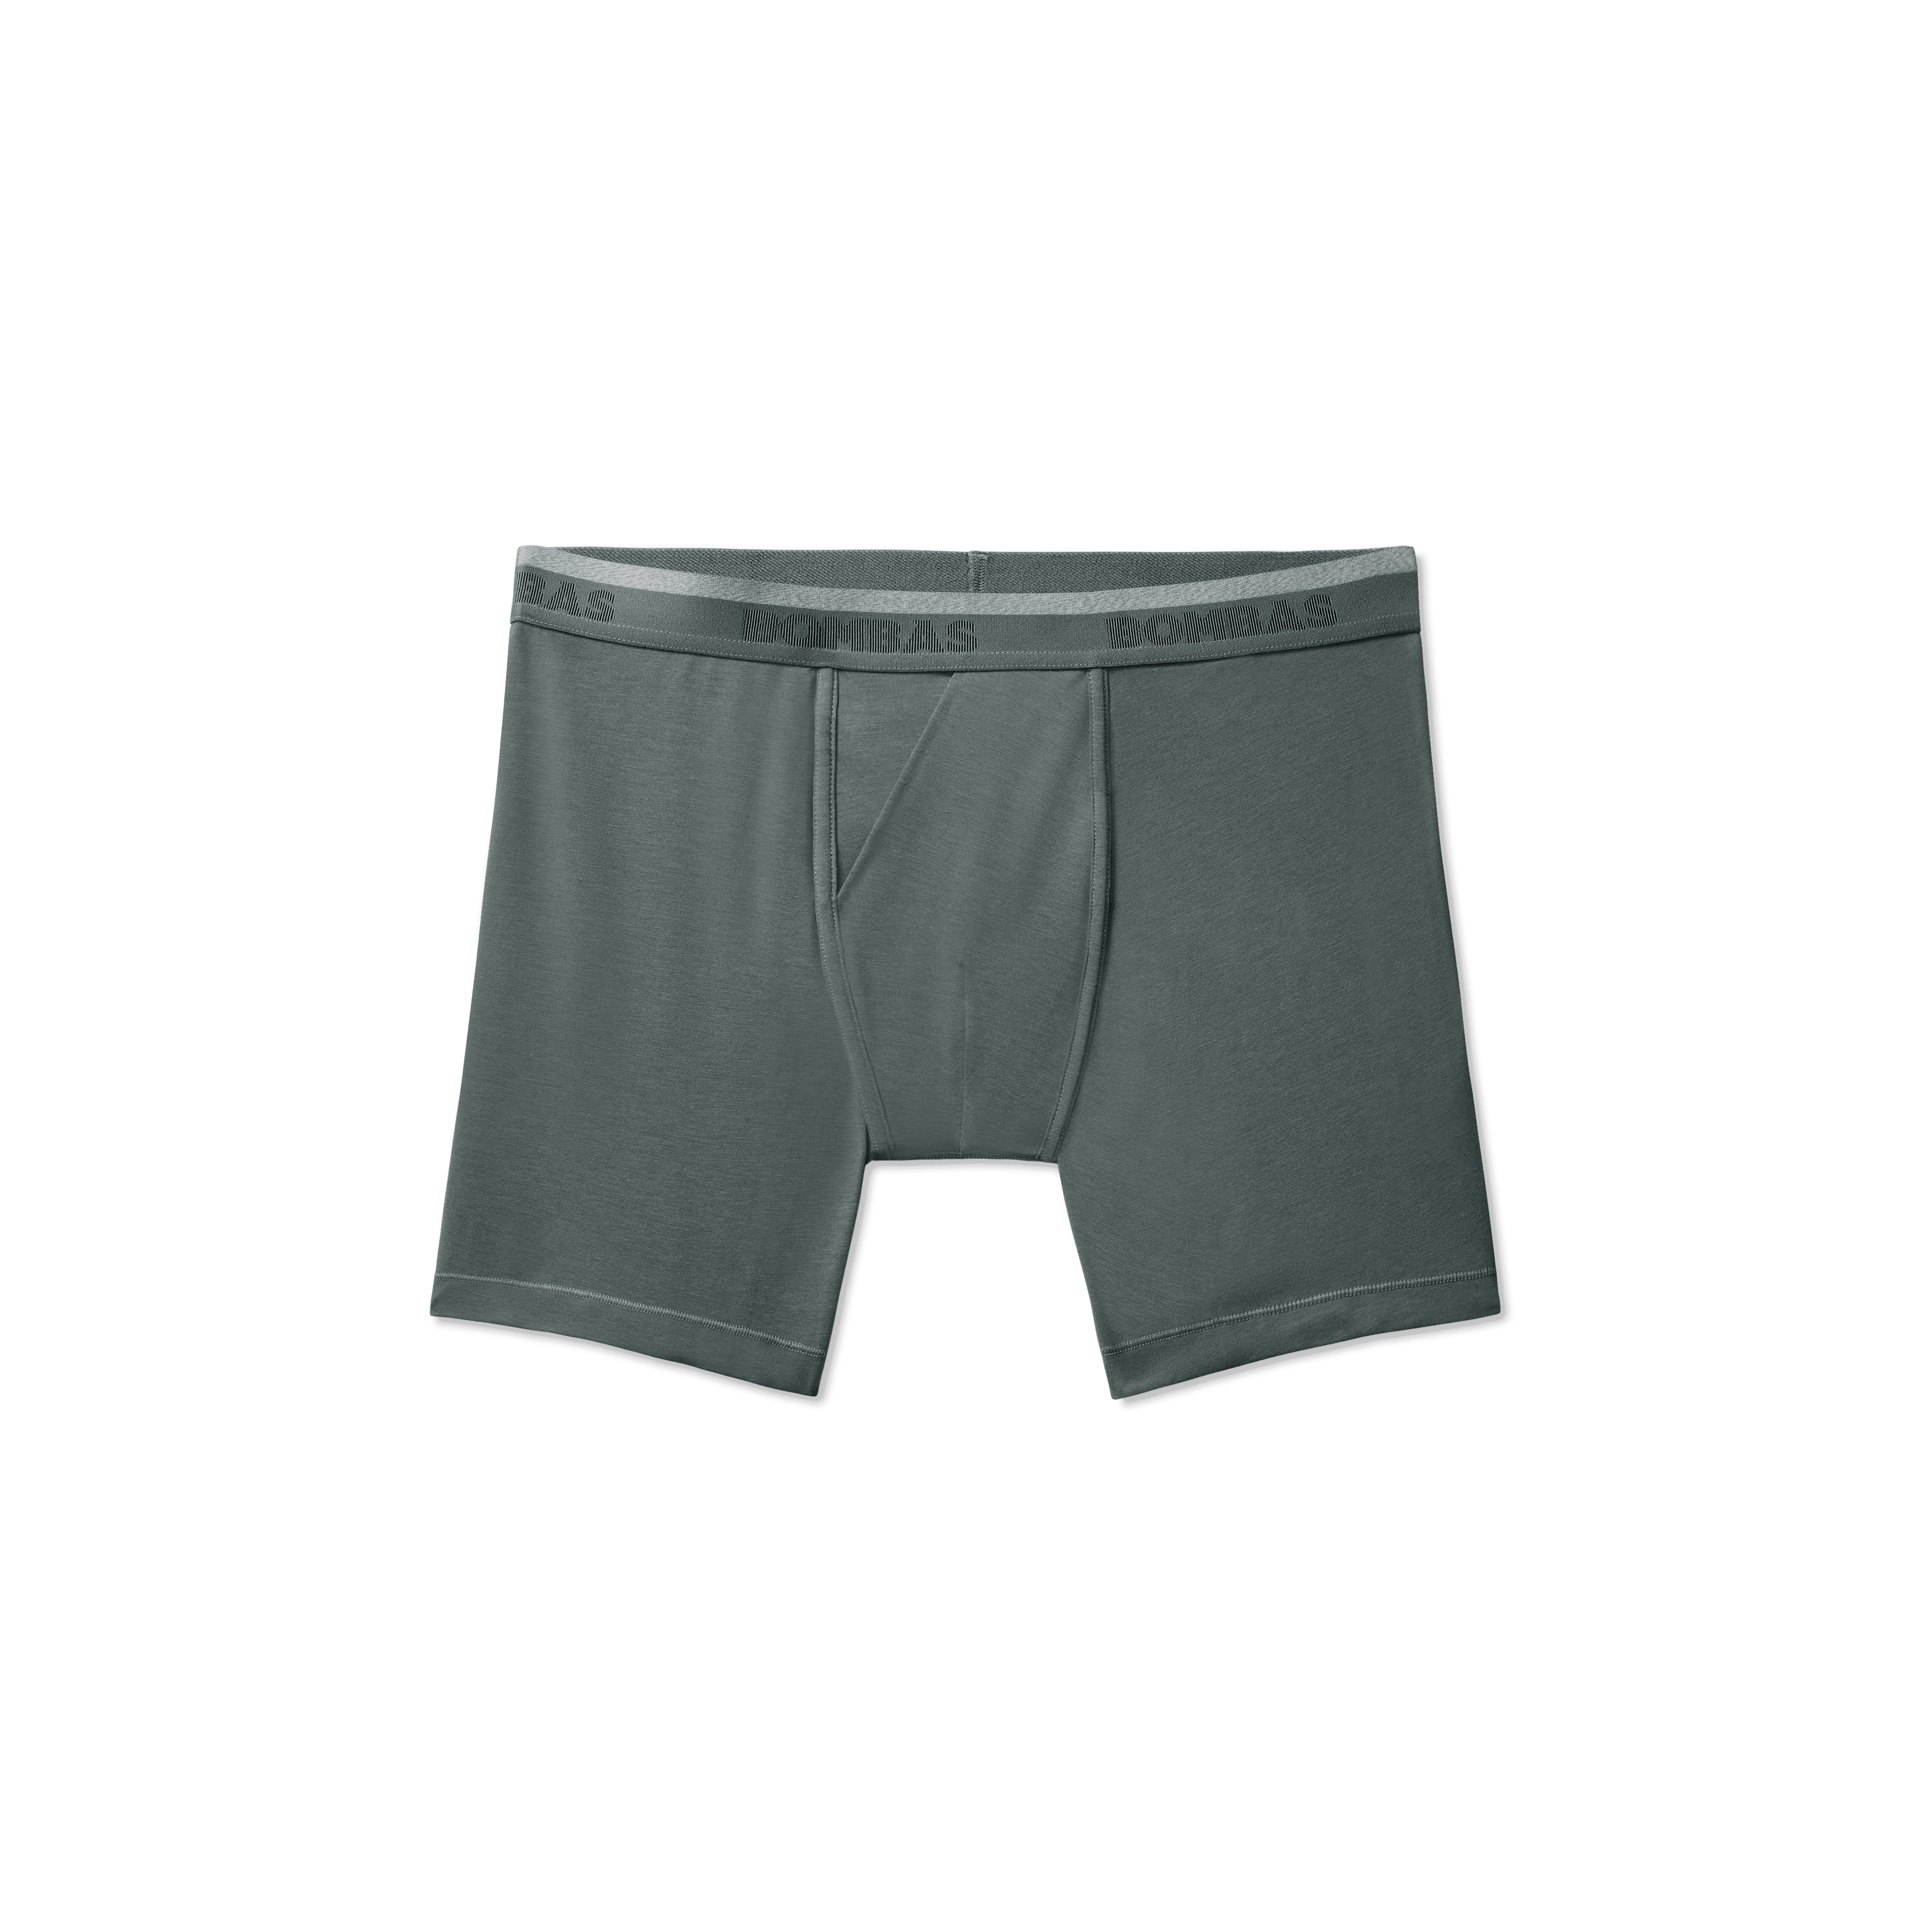 Bombas Underwear Review - Must Read This Before Buying